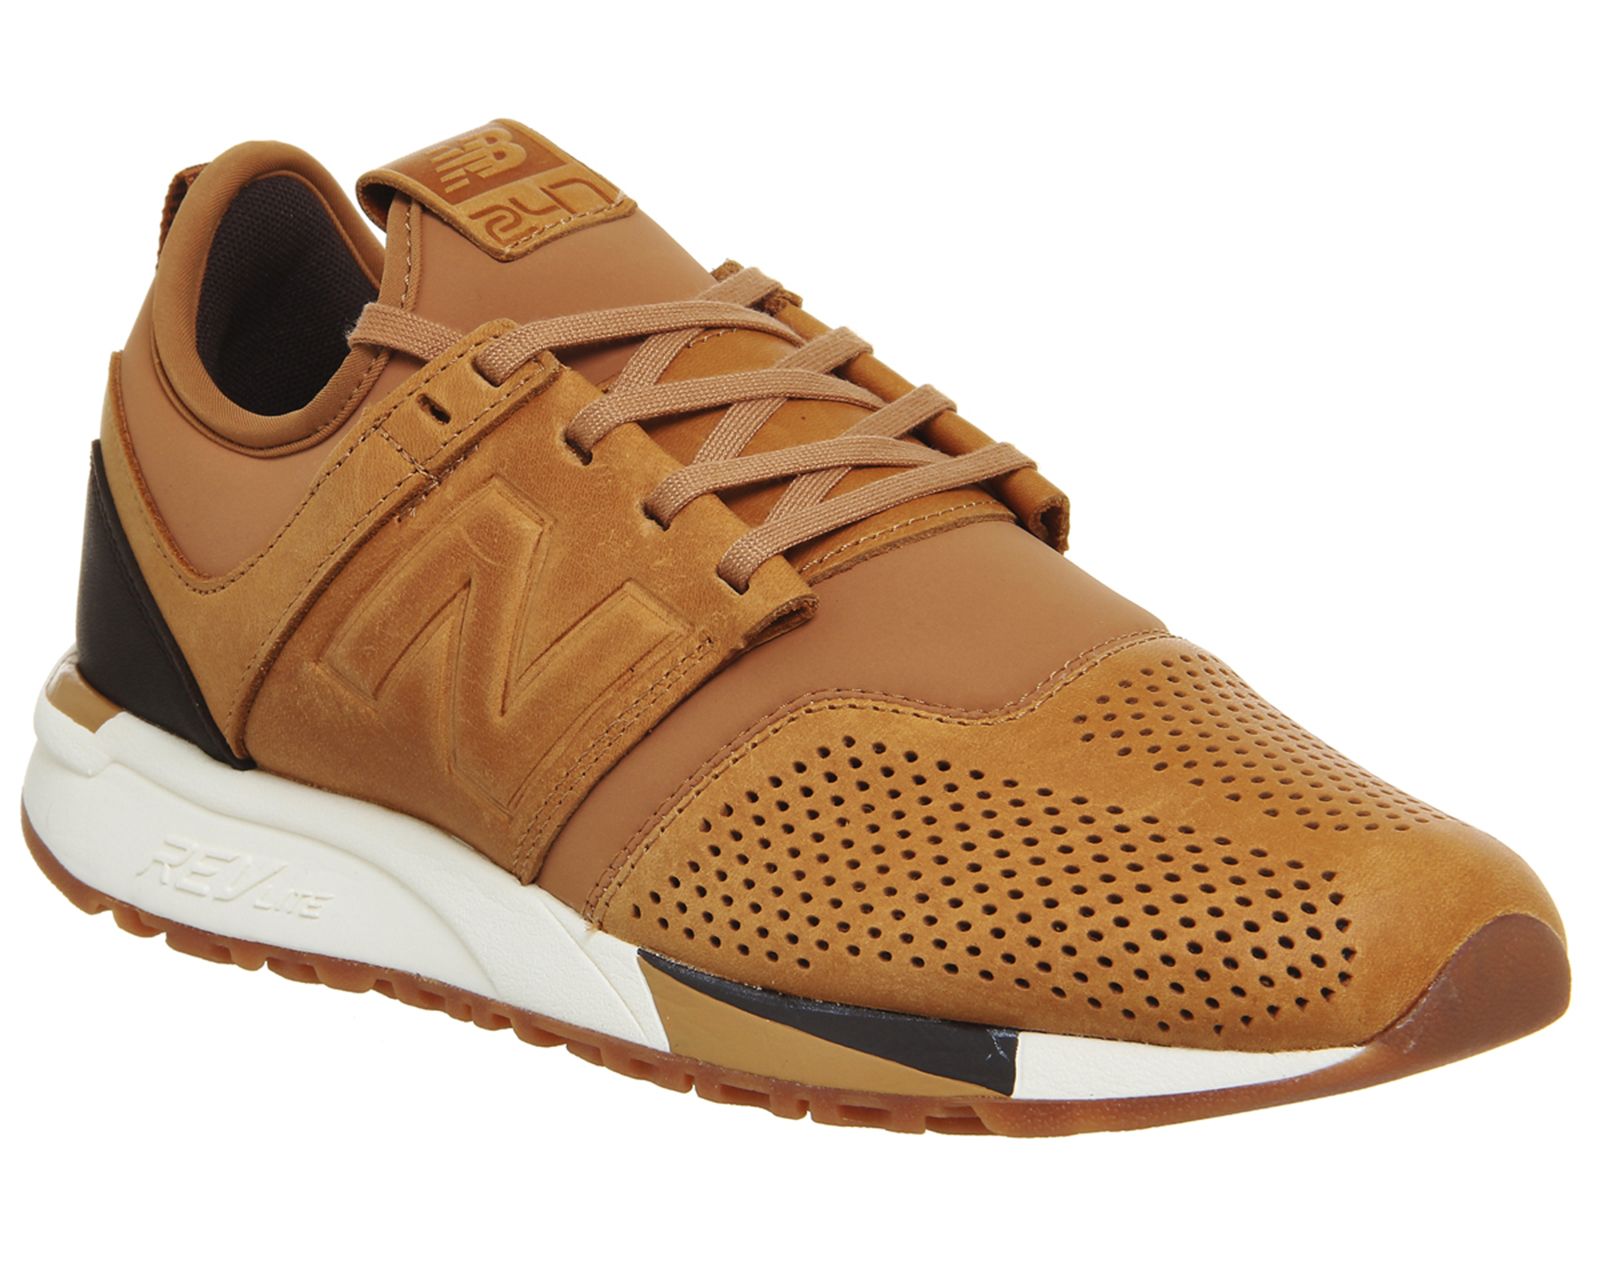 New Balance 247 Tan Brown Luxe - His trainers